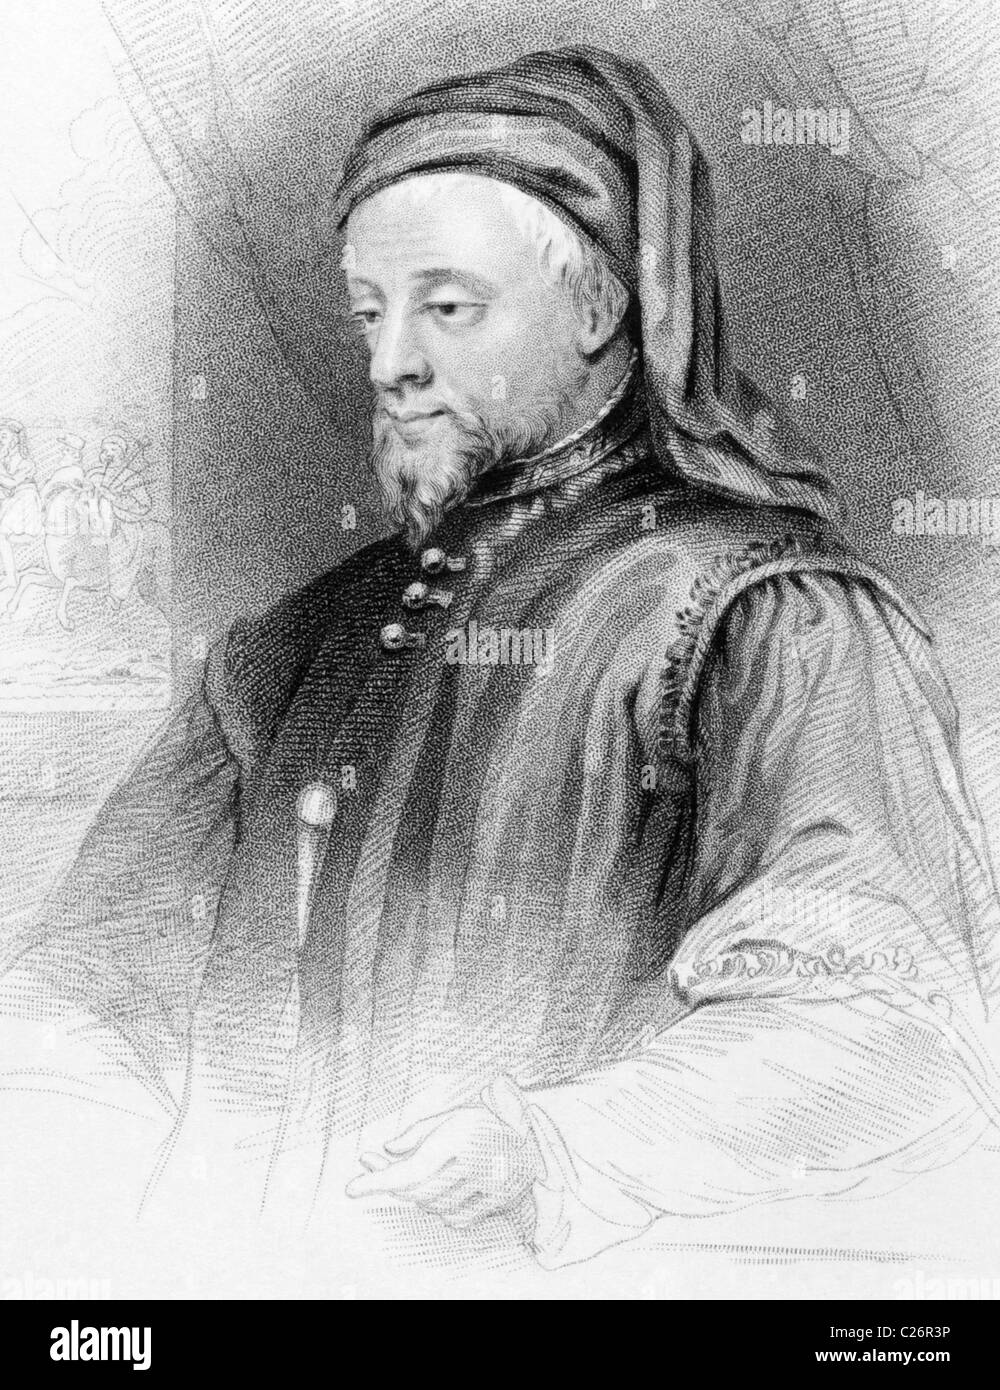 Geoffrey Chaucer (1343-1400) on engraving from 1838. English author, poet, philosopher, bureaucrat, courtier and diplomat. Stock Photo